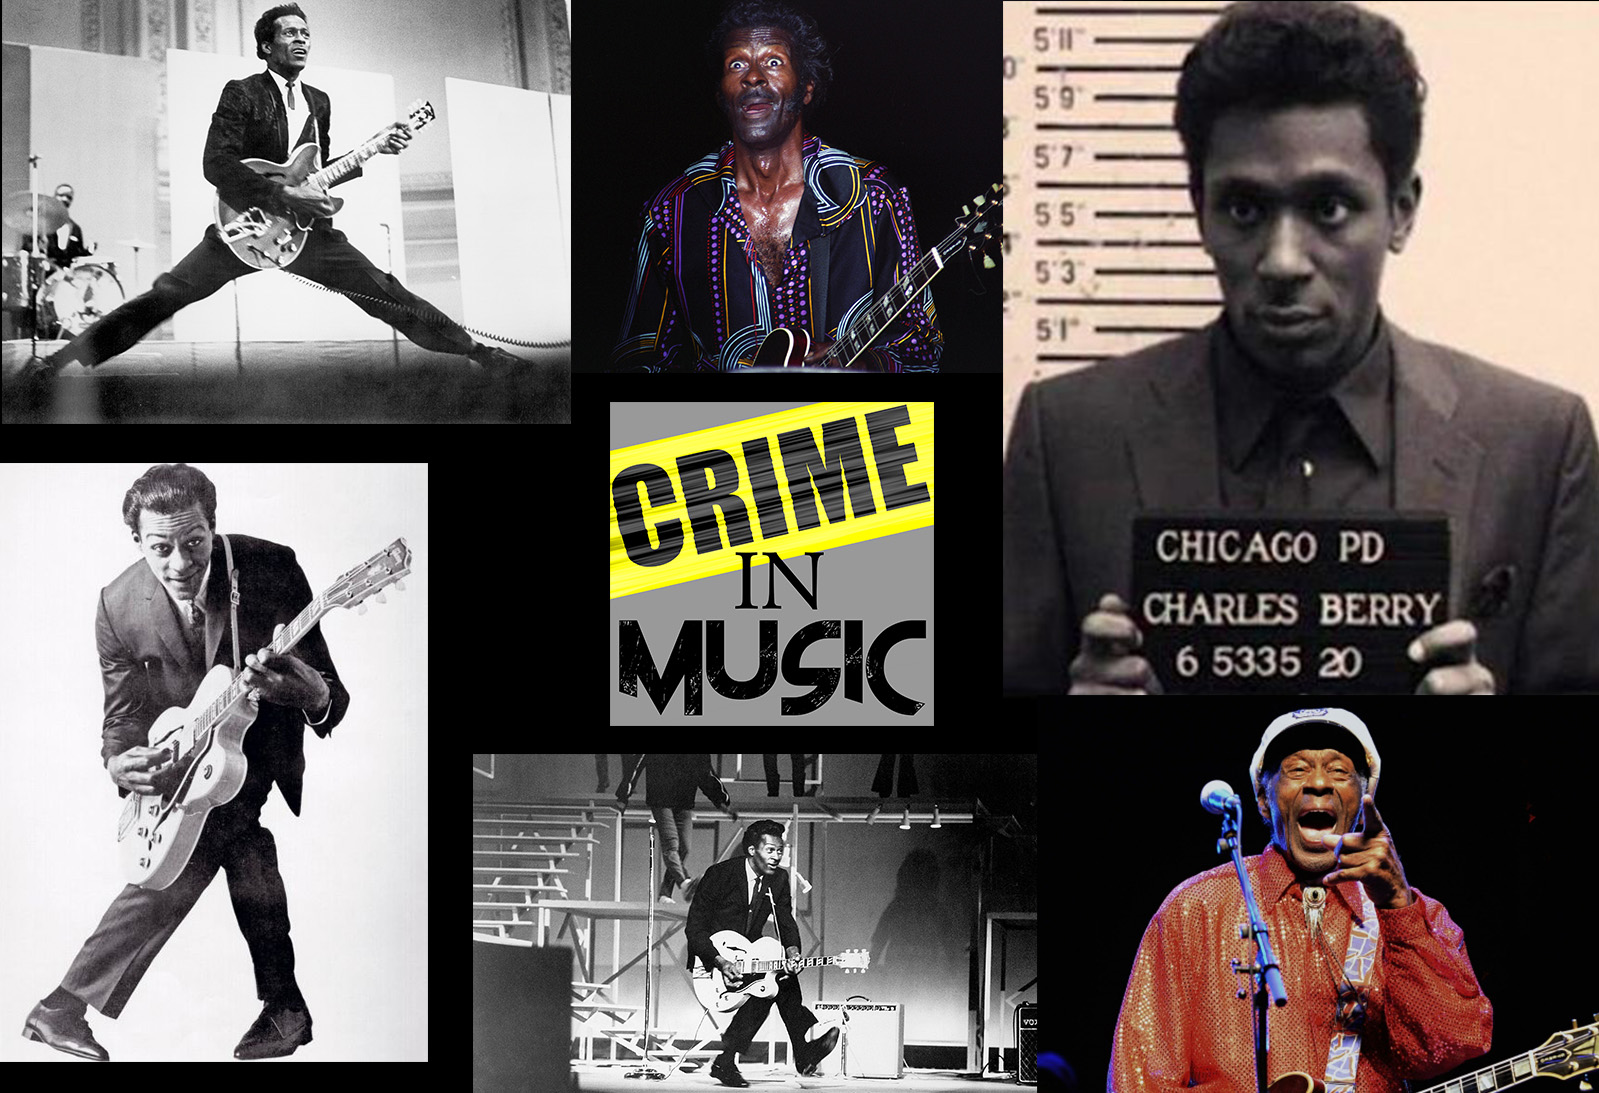 photo collage of Chuck Berry, Musician